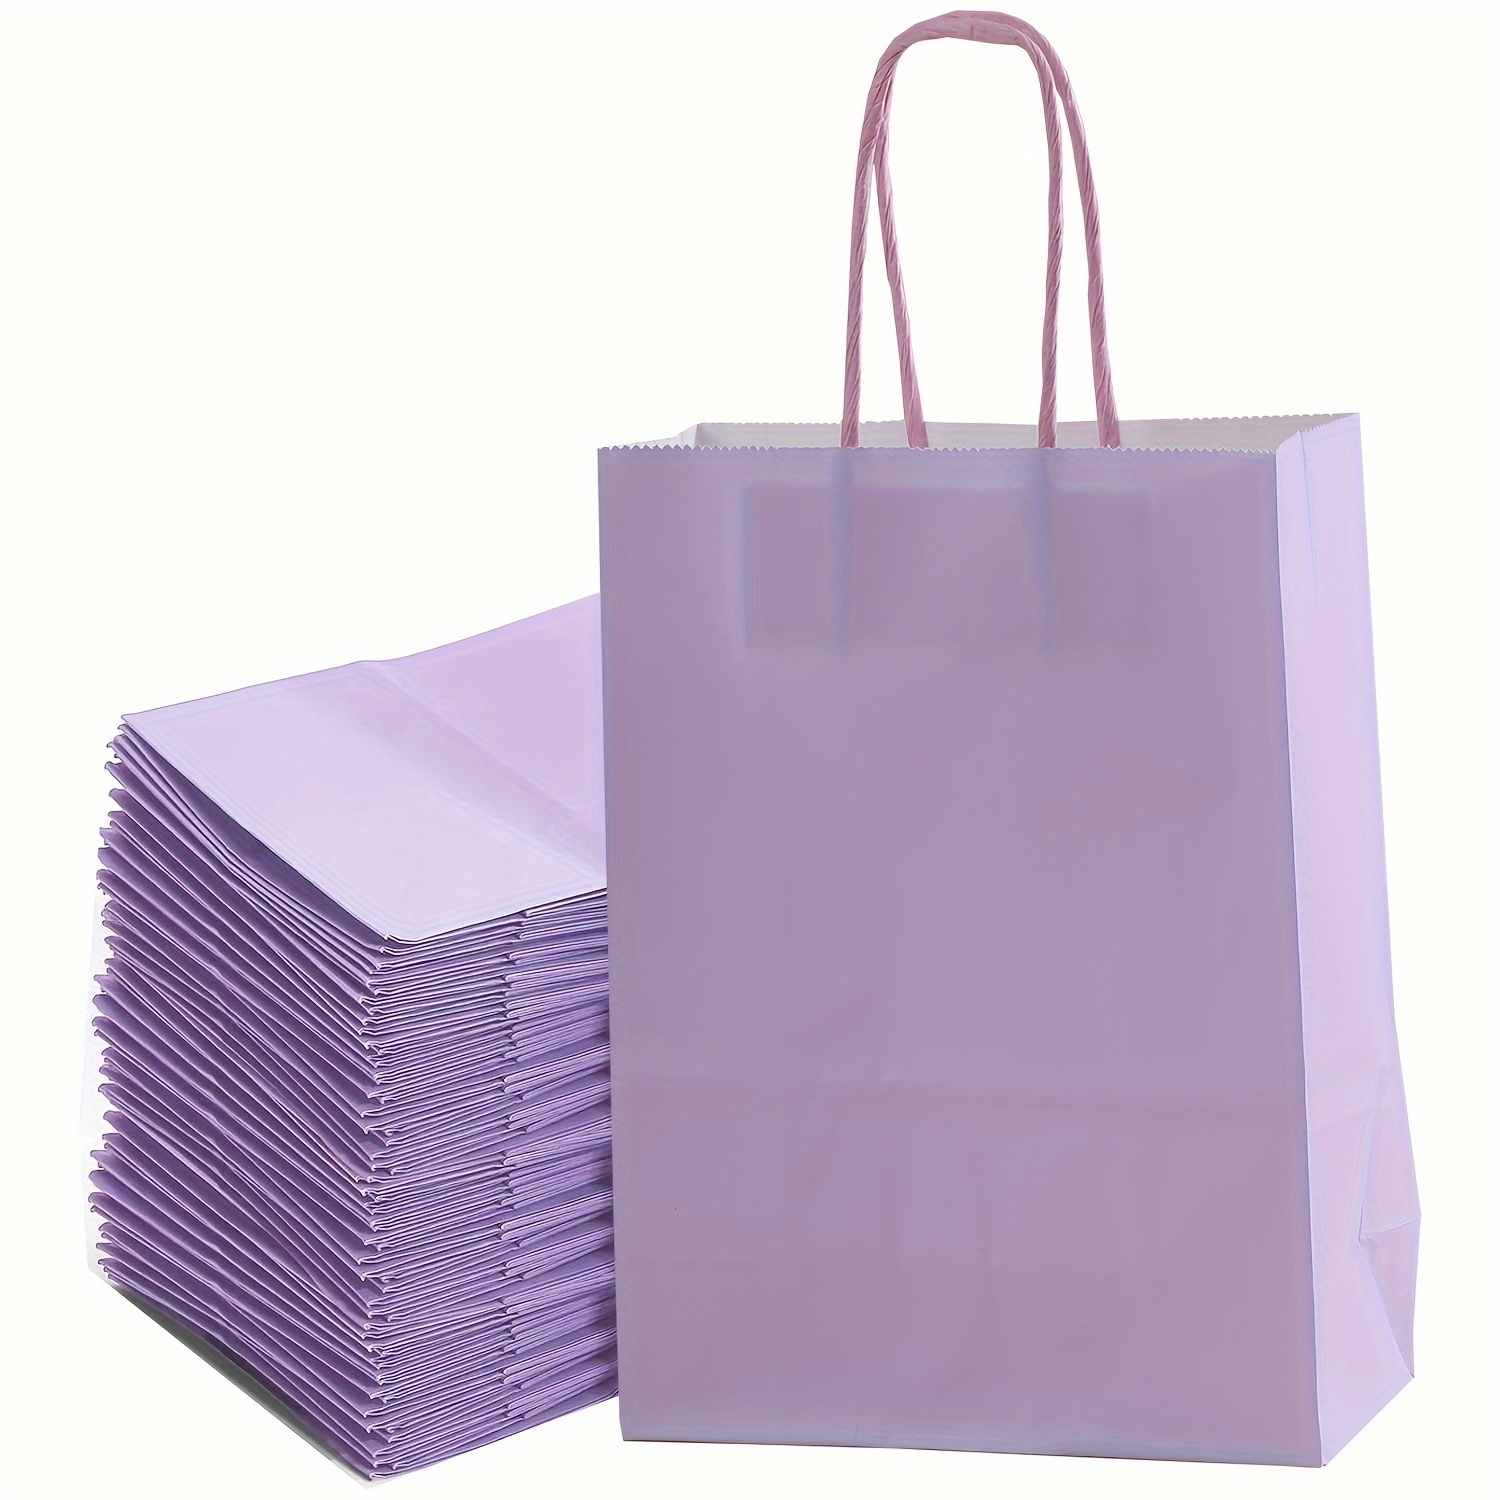 

24-piece Light Purple Gift Bags - Assorted Sizes (16x22x8cm) For Birthdays, Weddings, Youngsters Showers & More - Reusable Paper Tote Bags With Princess Theme For Party Favors, Shopping & Bakery